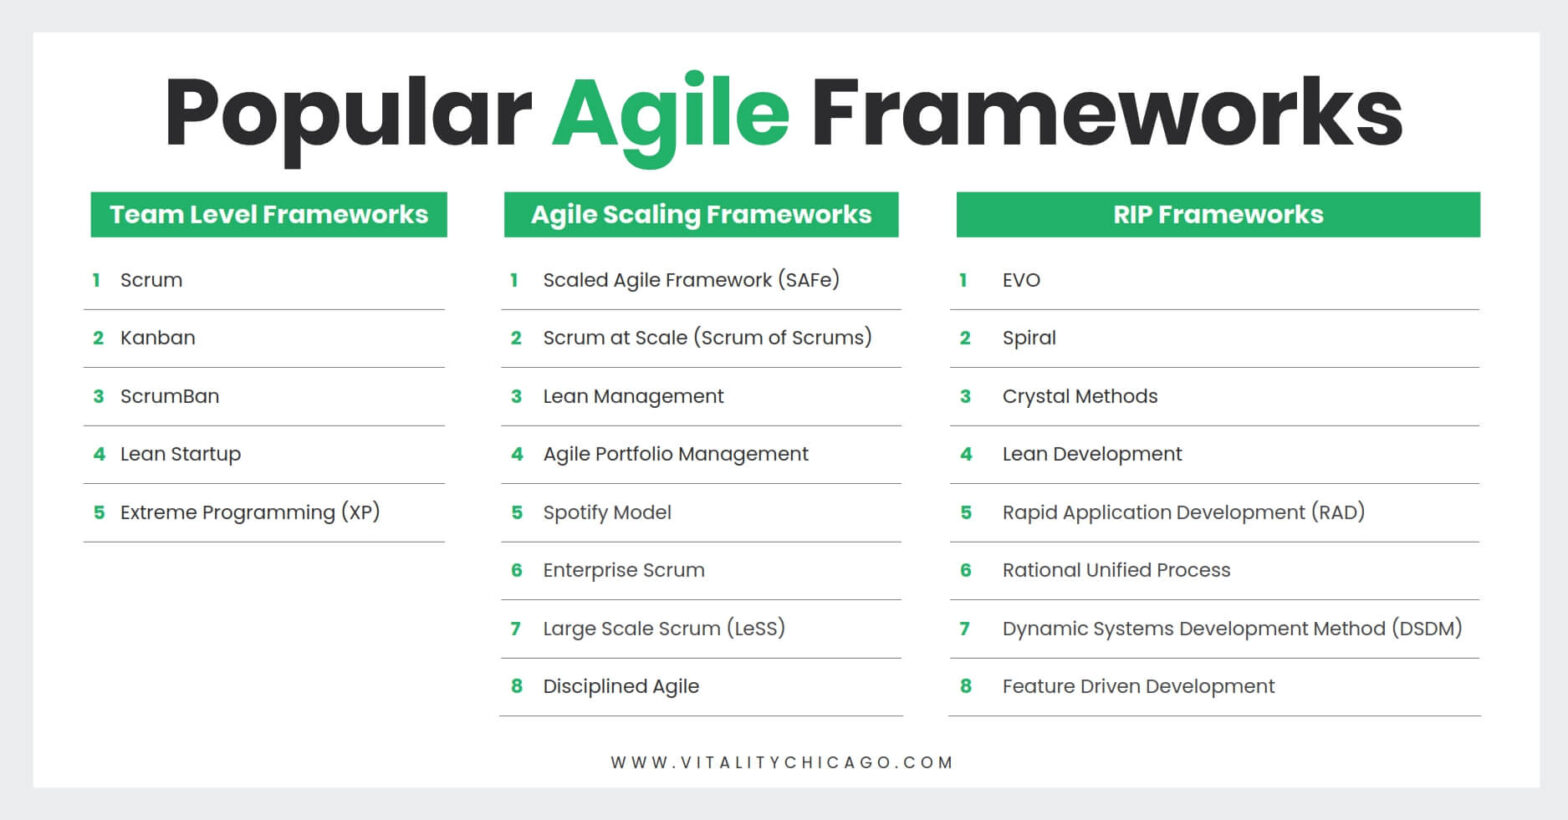 The Most Popular Agile Frameworks Today